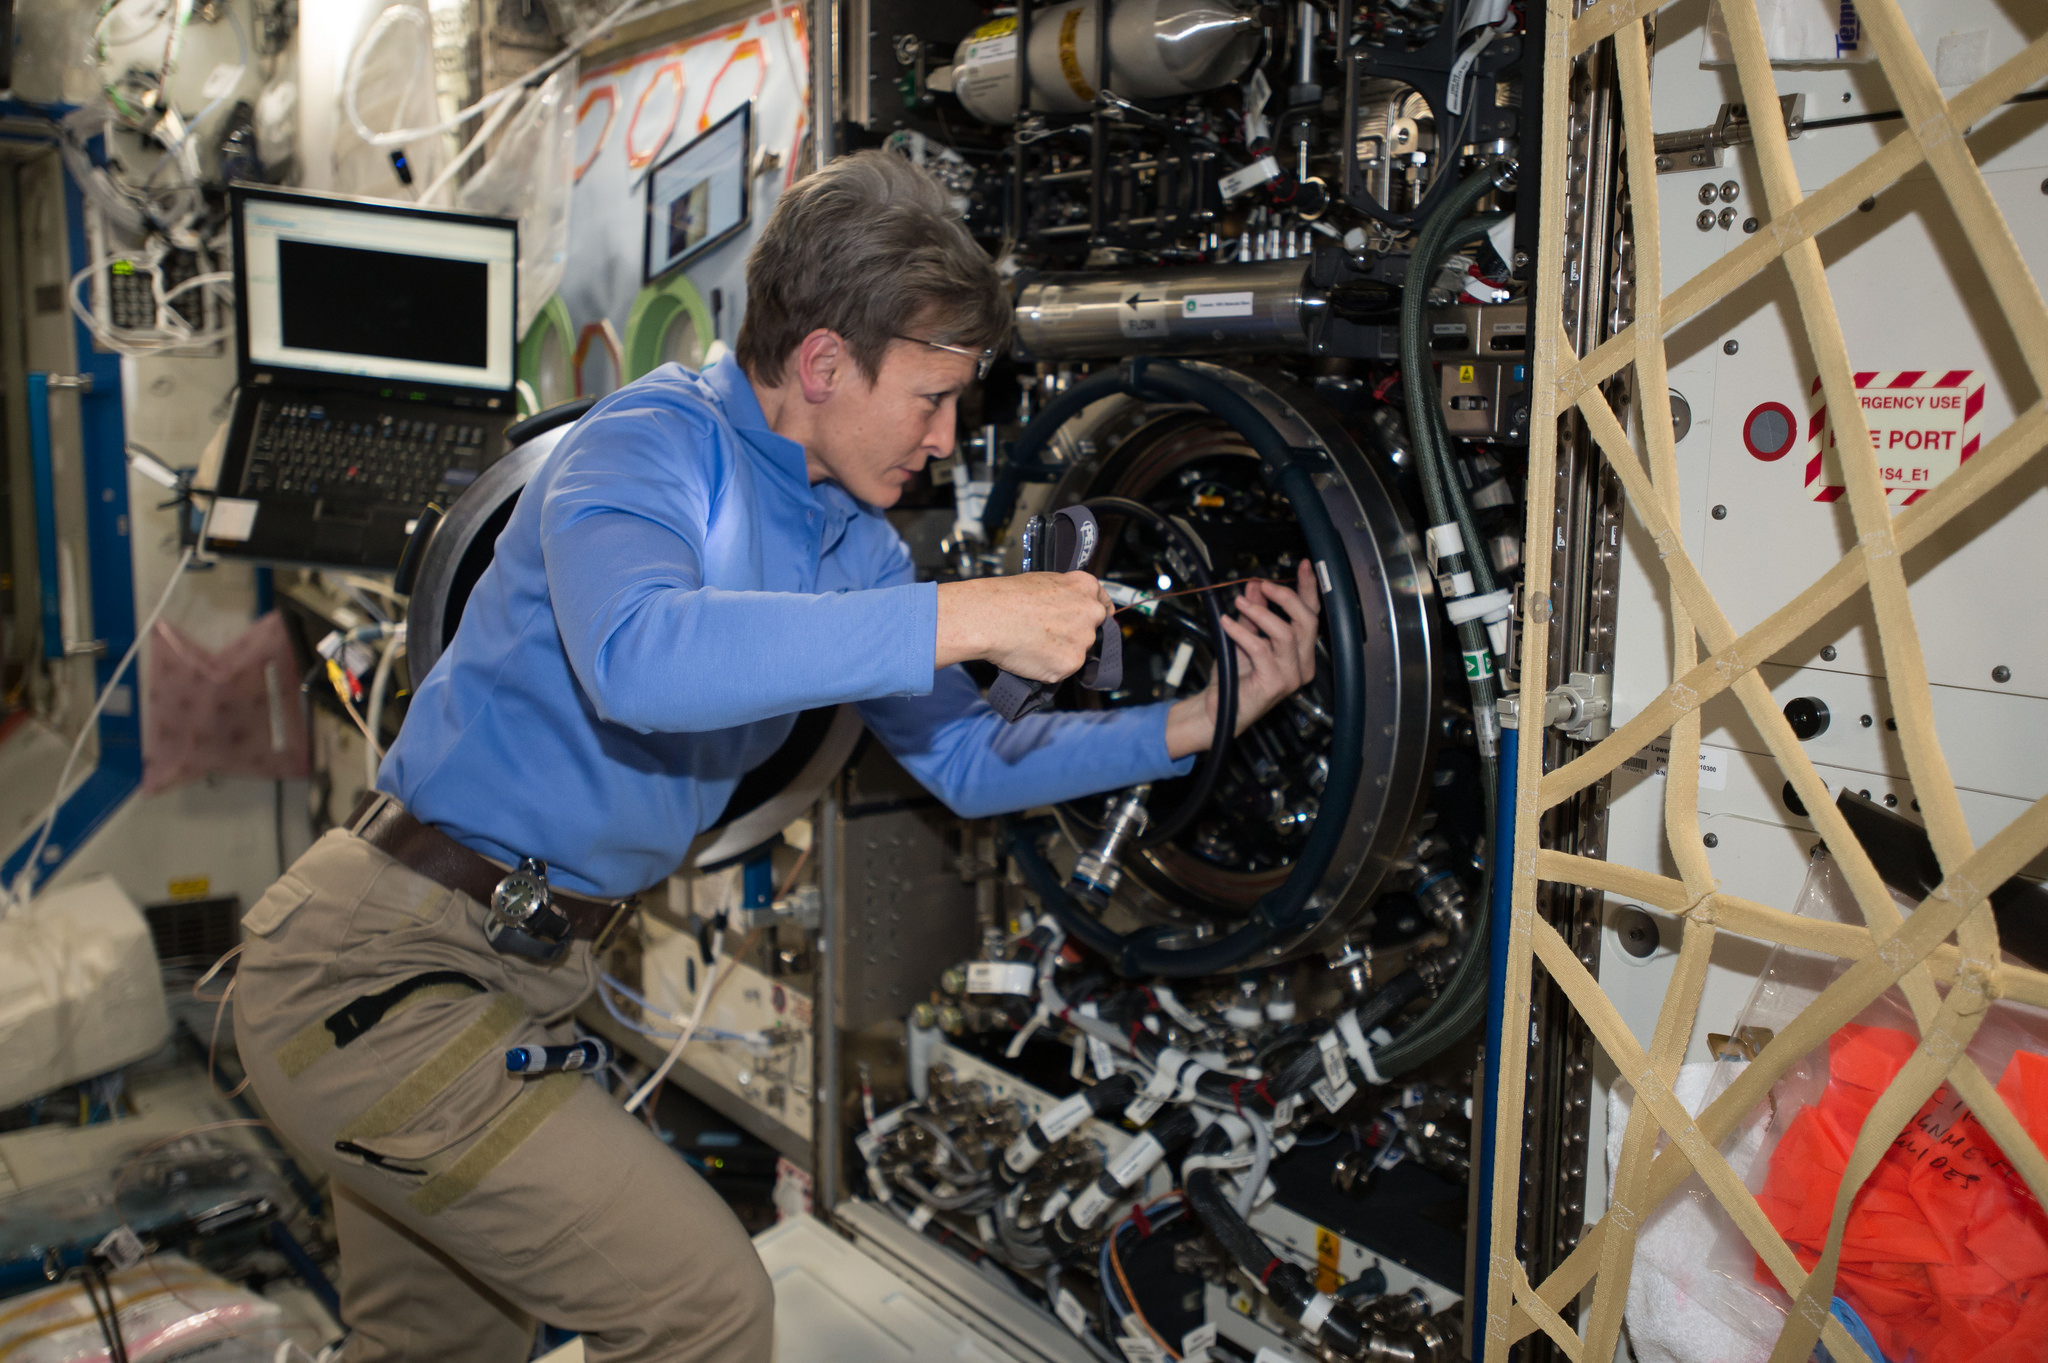 Expedition 51 Commander Peggy Whitson of NASA performs investigative troubleshooting in December 2016 